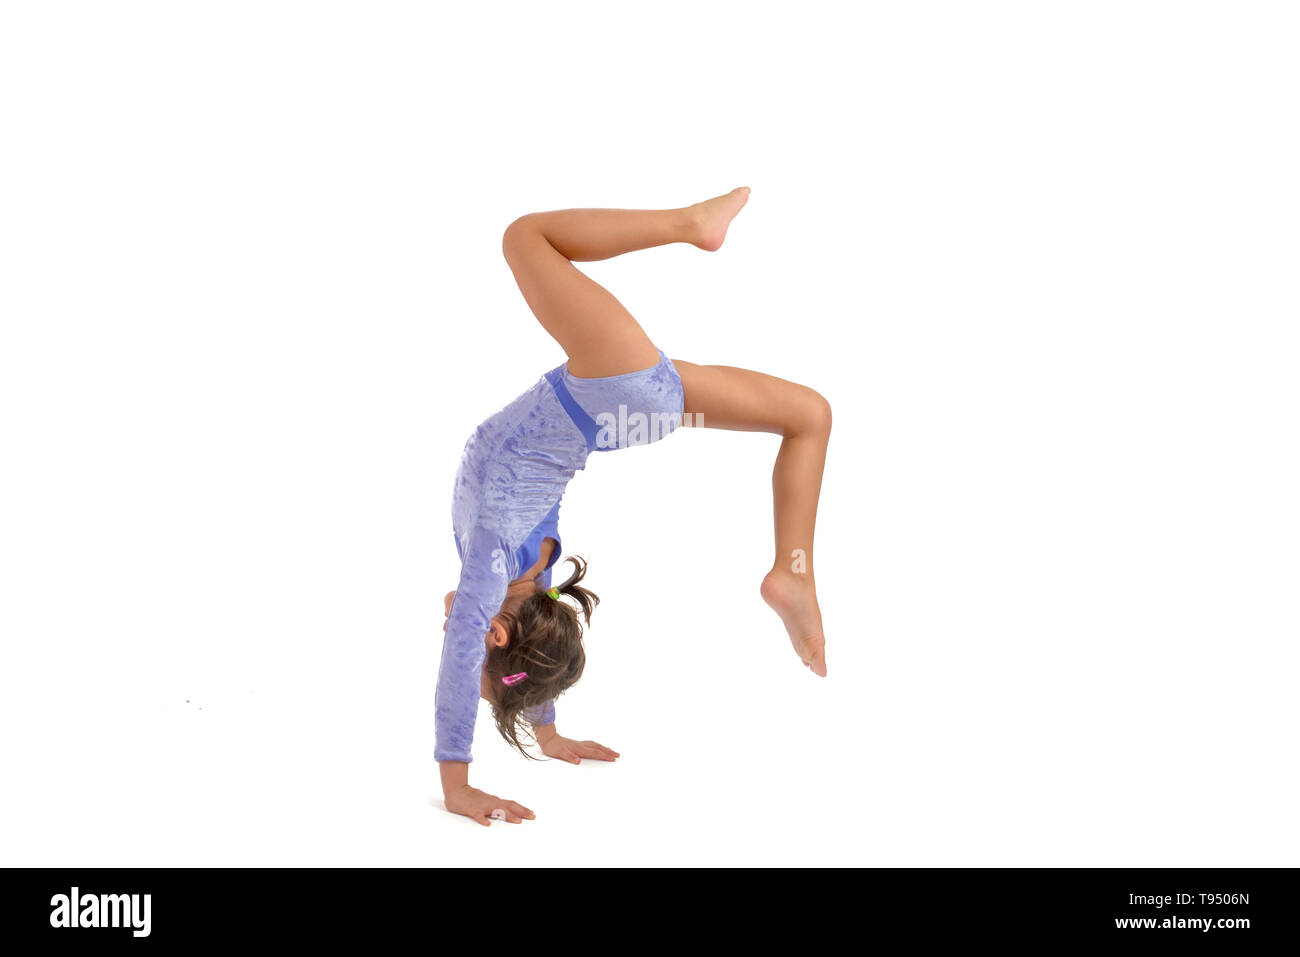 Little gymnast on a white background Stock Photo